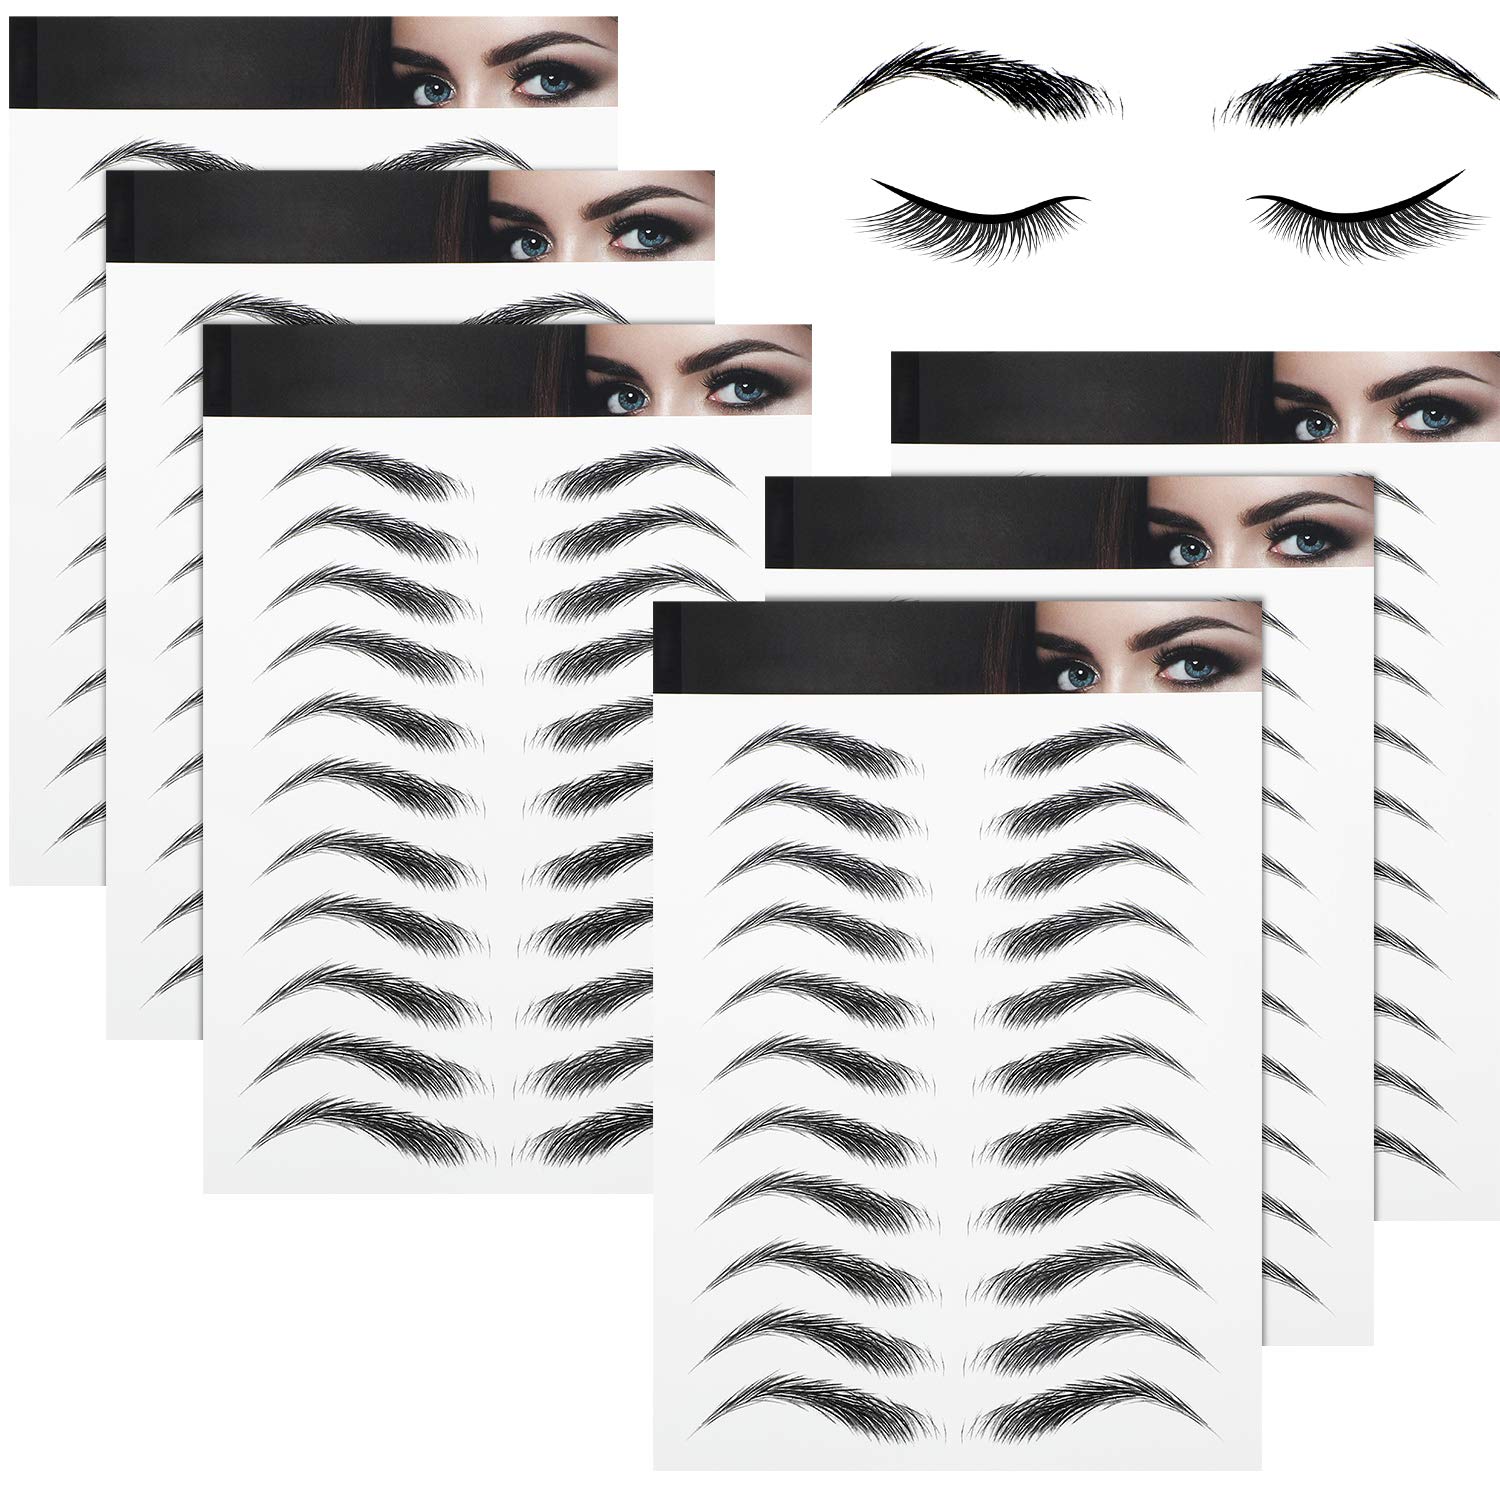 Waterproof Eyebrow 3D Tattoo Stickers for Women and Girls